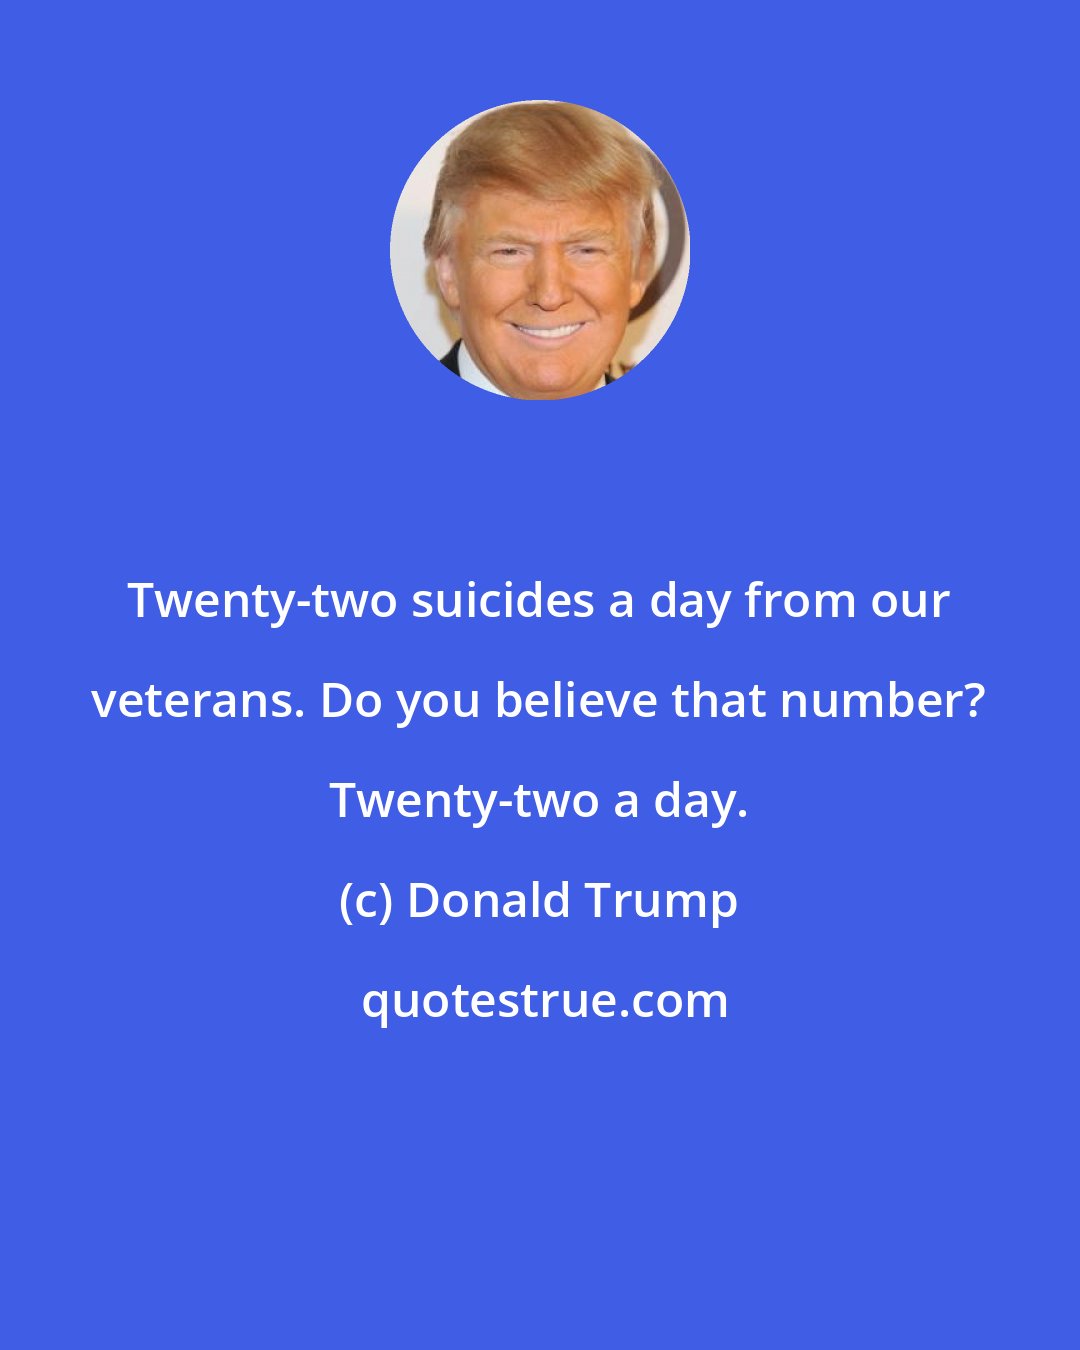 Donald Trump: Twenty-two suicides a day from our veterans. Do you believe that number? Twenty-two a day.